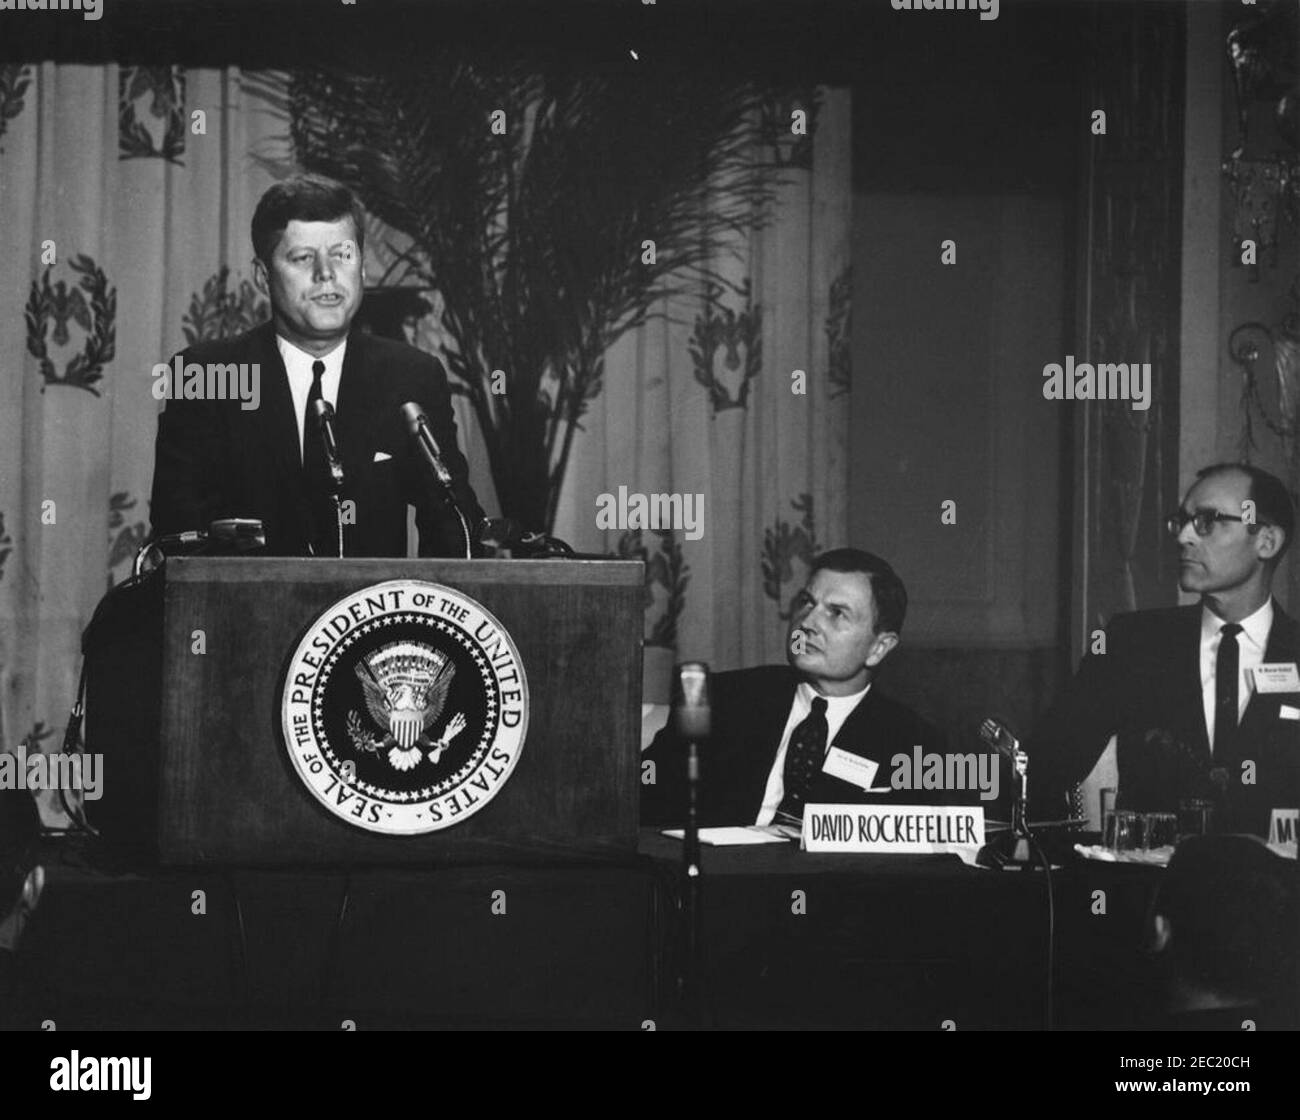 Address to the Symposium on Economic Growth, 9:53AM. President John F. Kennedy (at lectern) delivers remarks at the American Bankers Association (ABA) Symposium on Economic Growth. Seated right of lectern: President of Chase Manhattan Bank, David Rockefeller; Chairman of the First National Bank in Thomson, Georgia, M. Monroe Kimbrel. Mayflower Hotel, Washington, D.C. Stock Photo